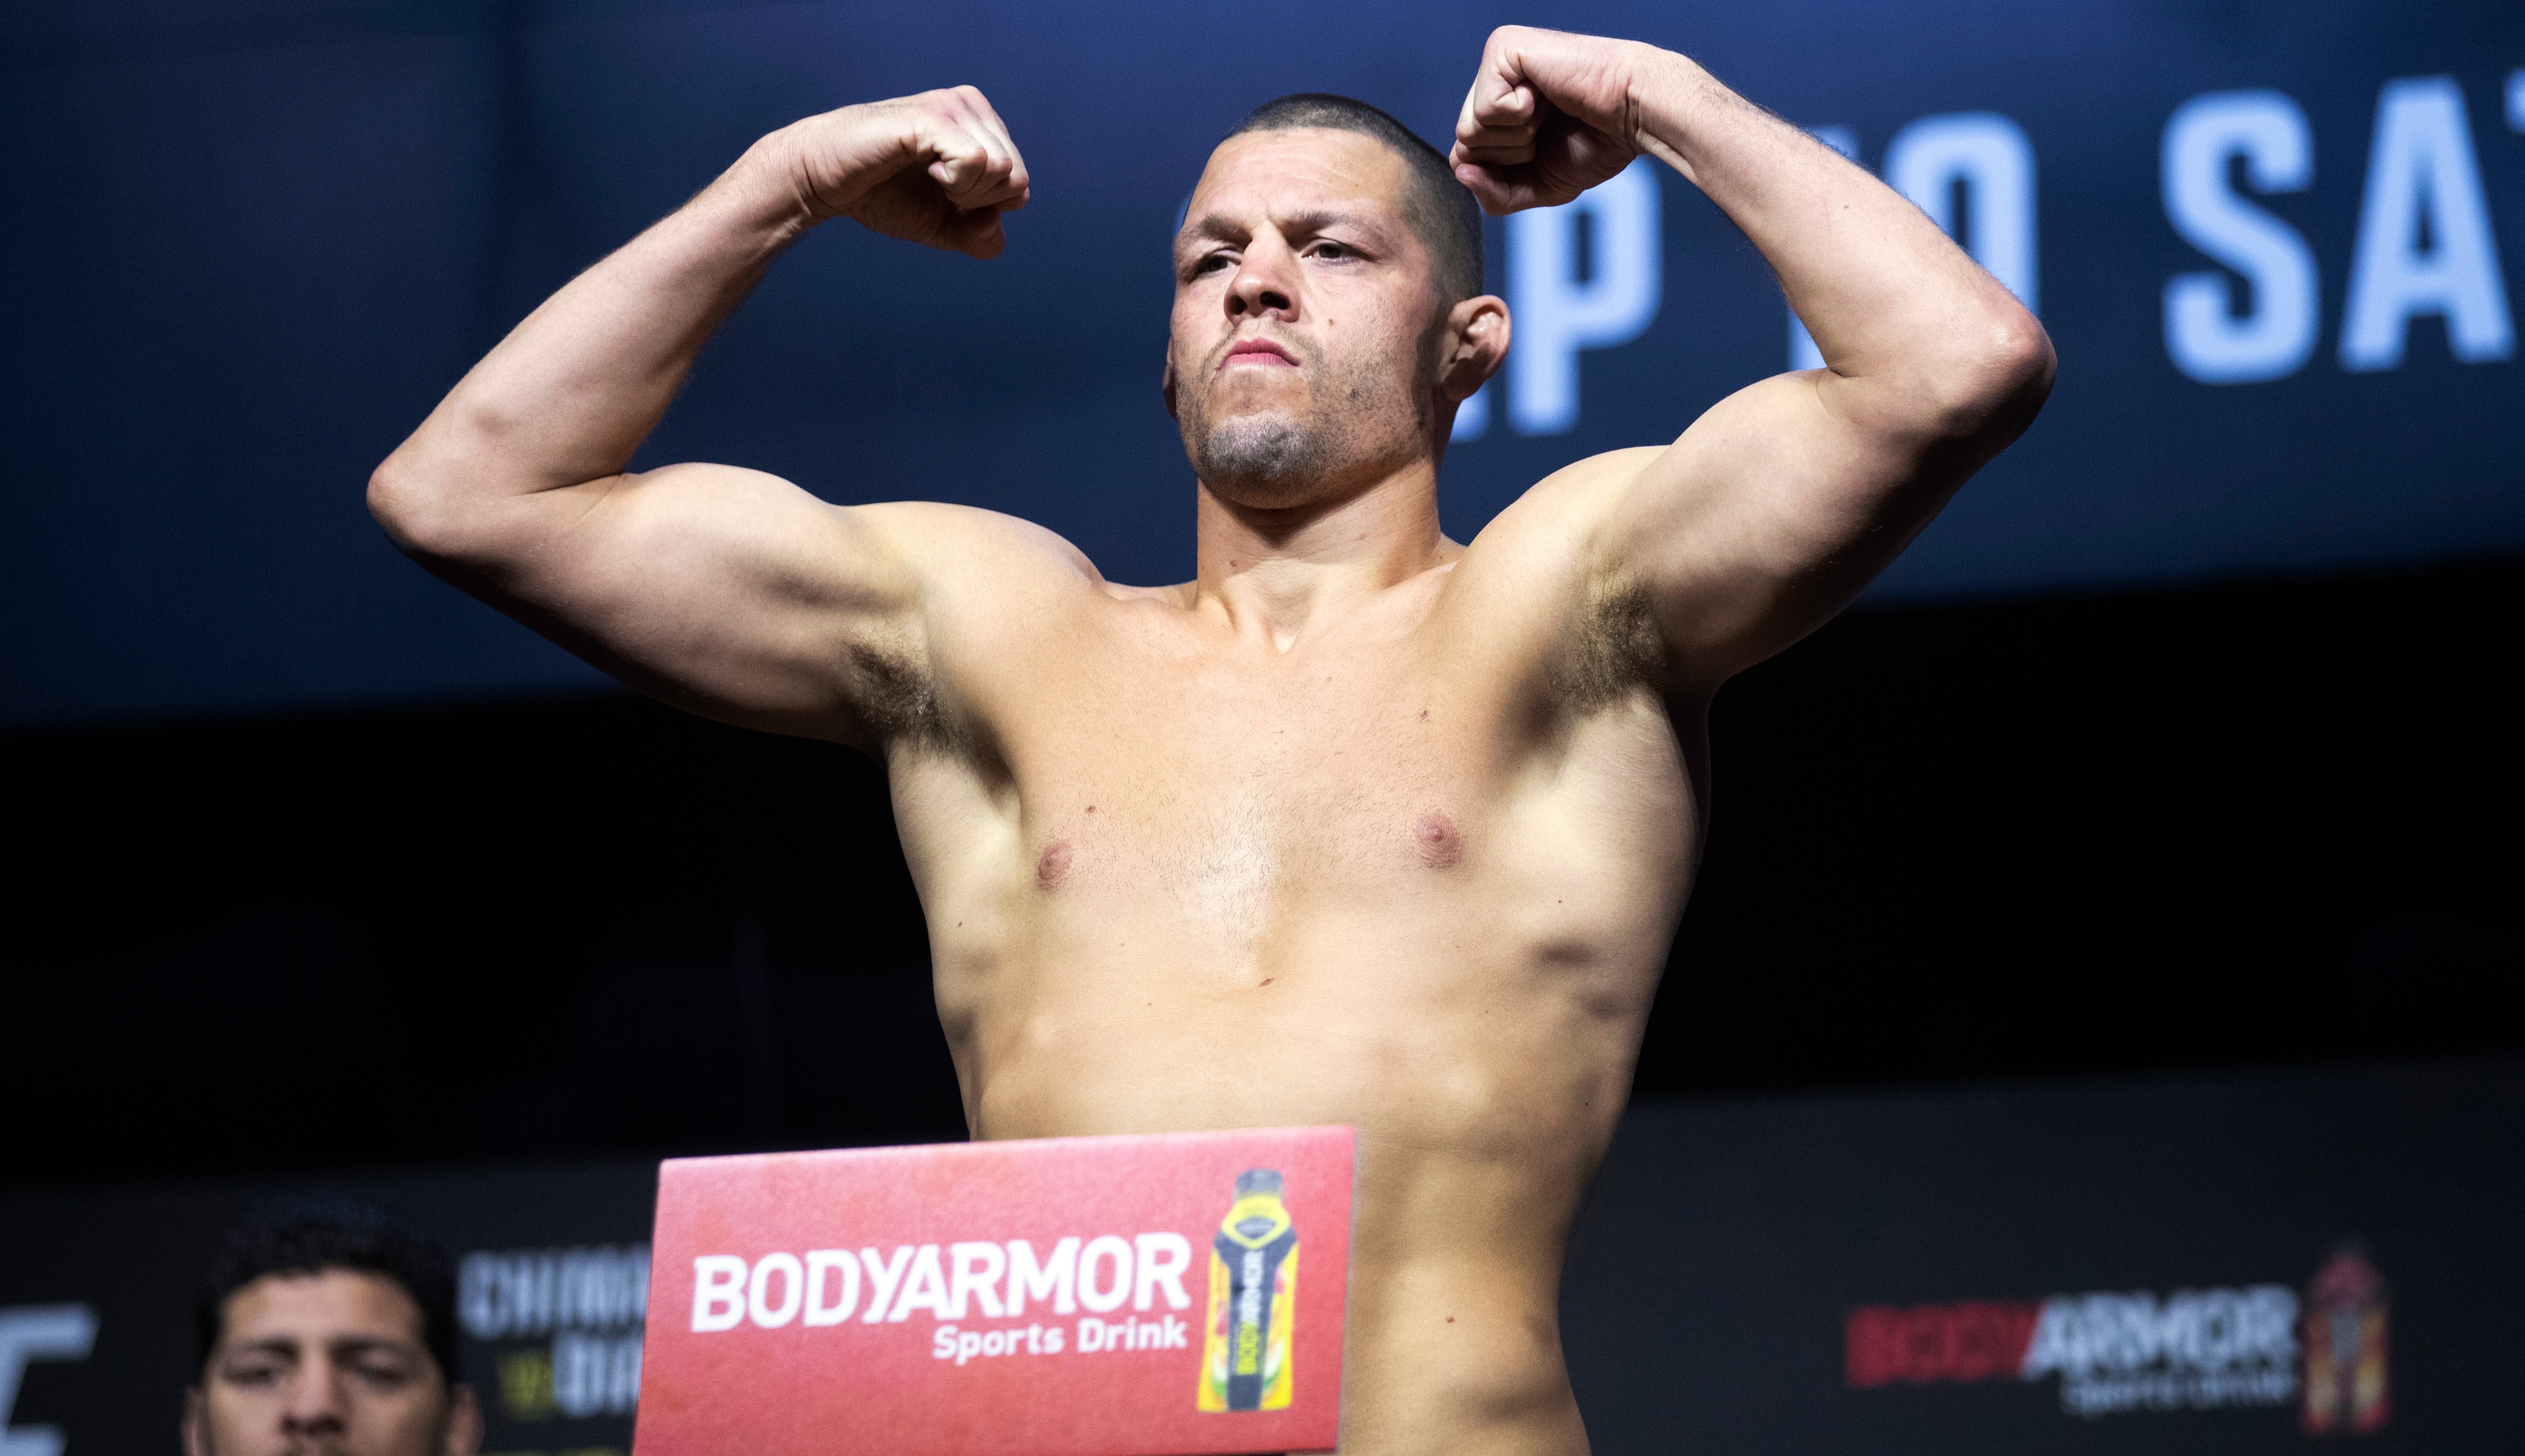 Nate Diaz is making his professional boxing debut